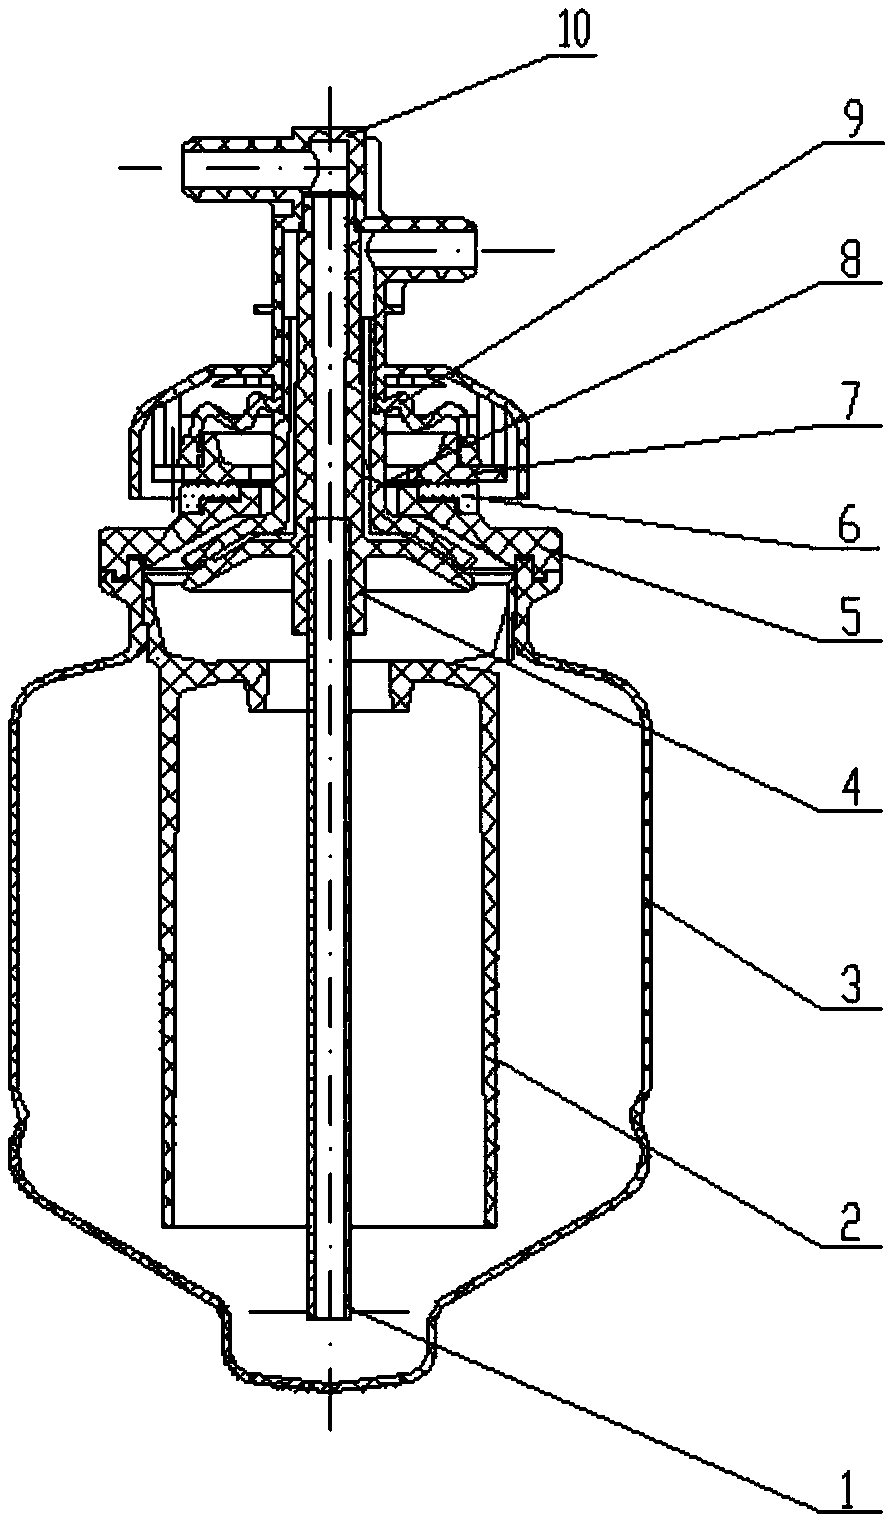 Plasma separation cup automatic assembly system and method